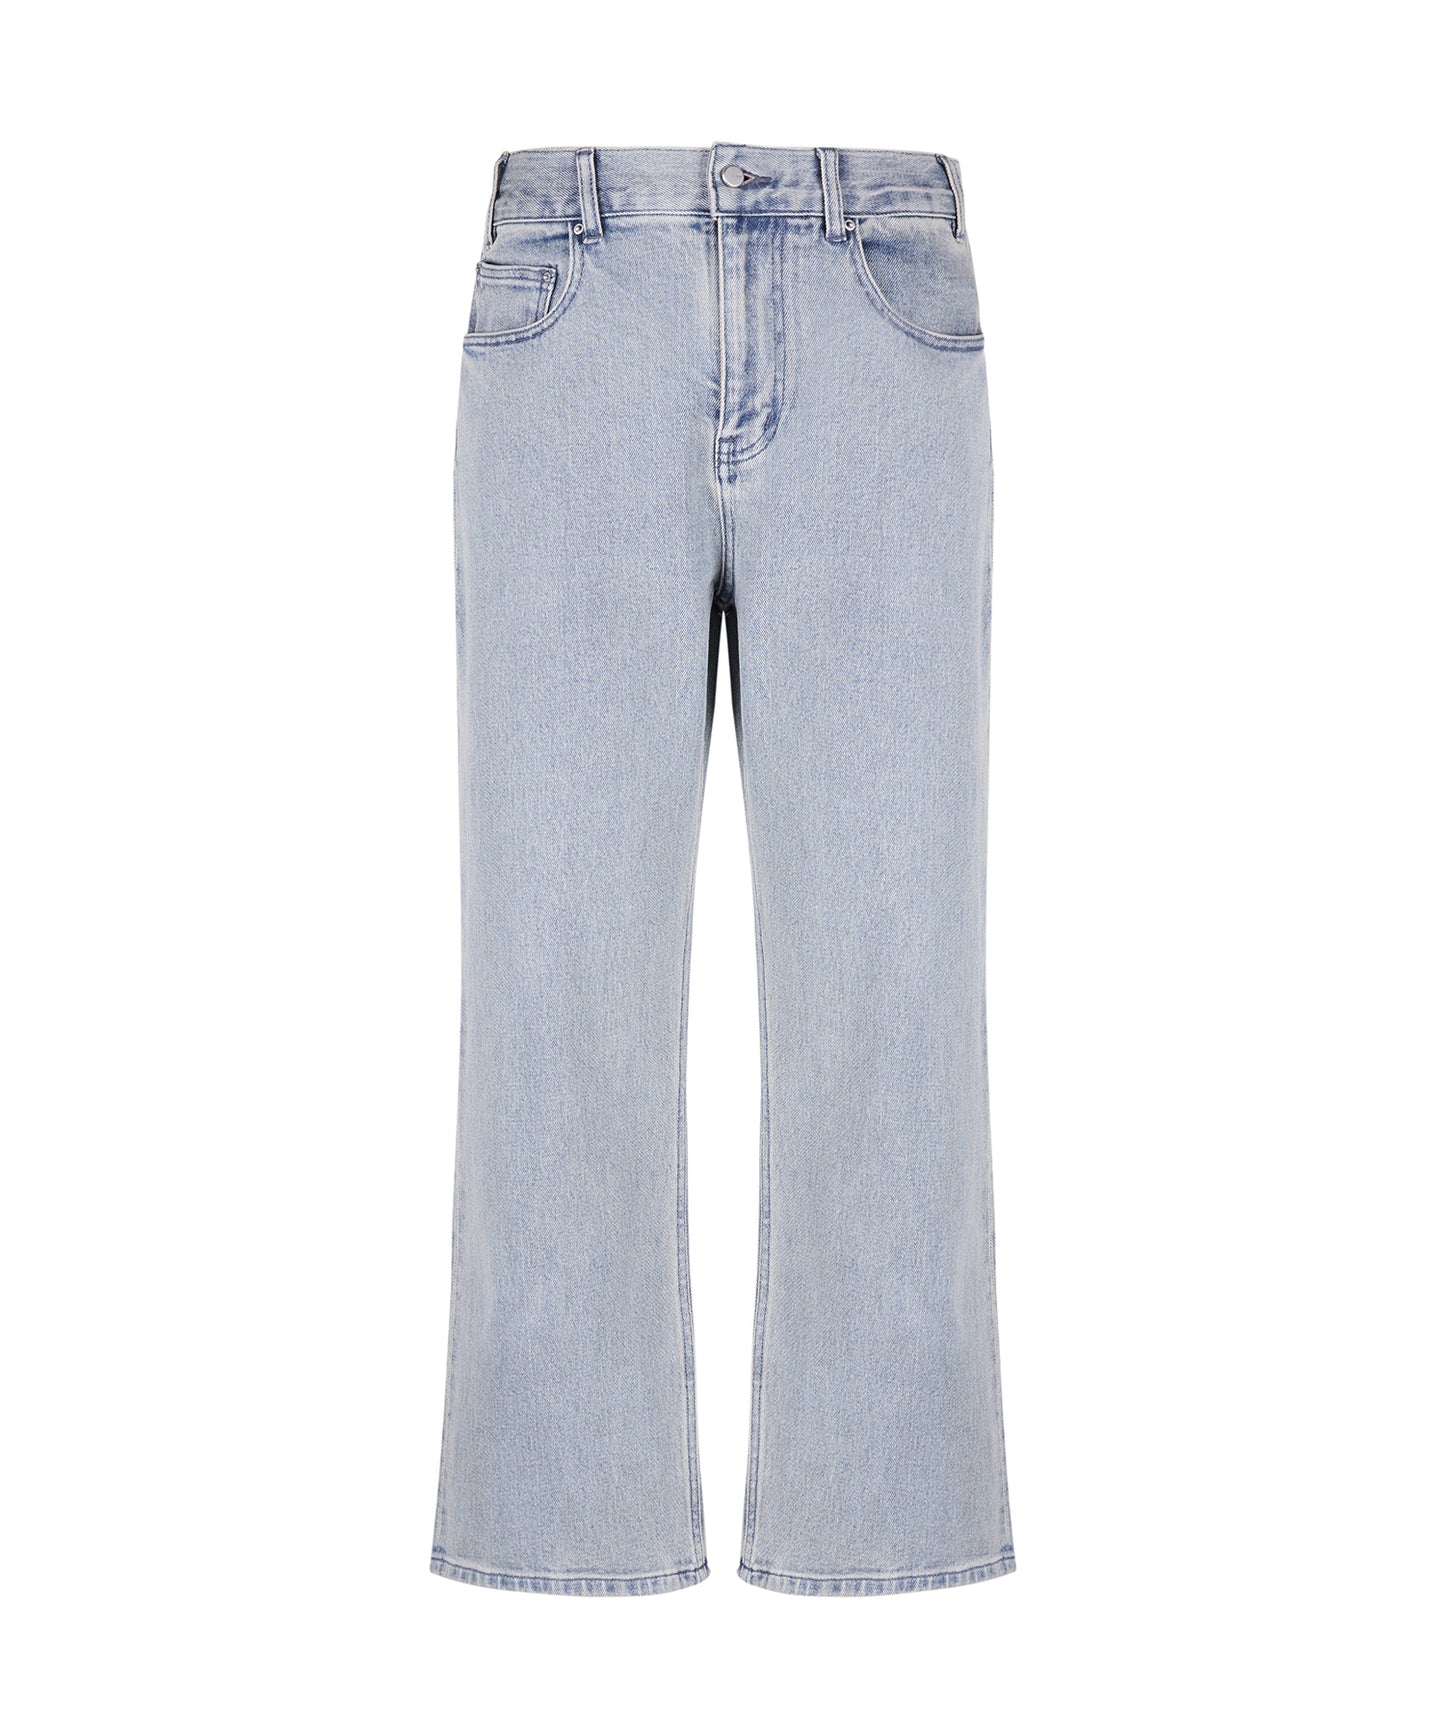 Retro Casual Bootcut jeans